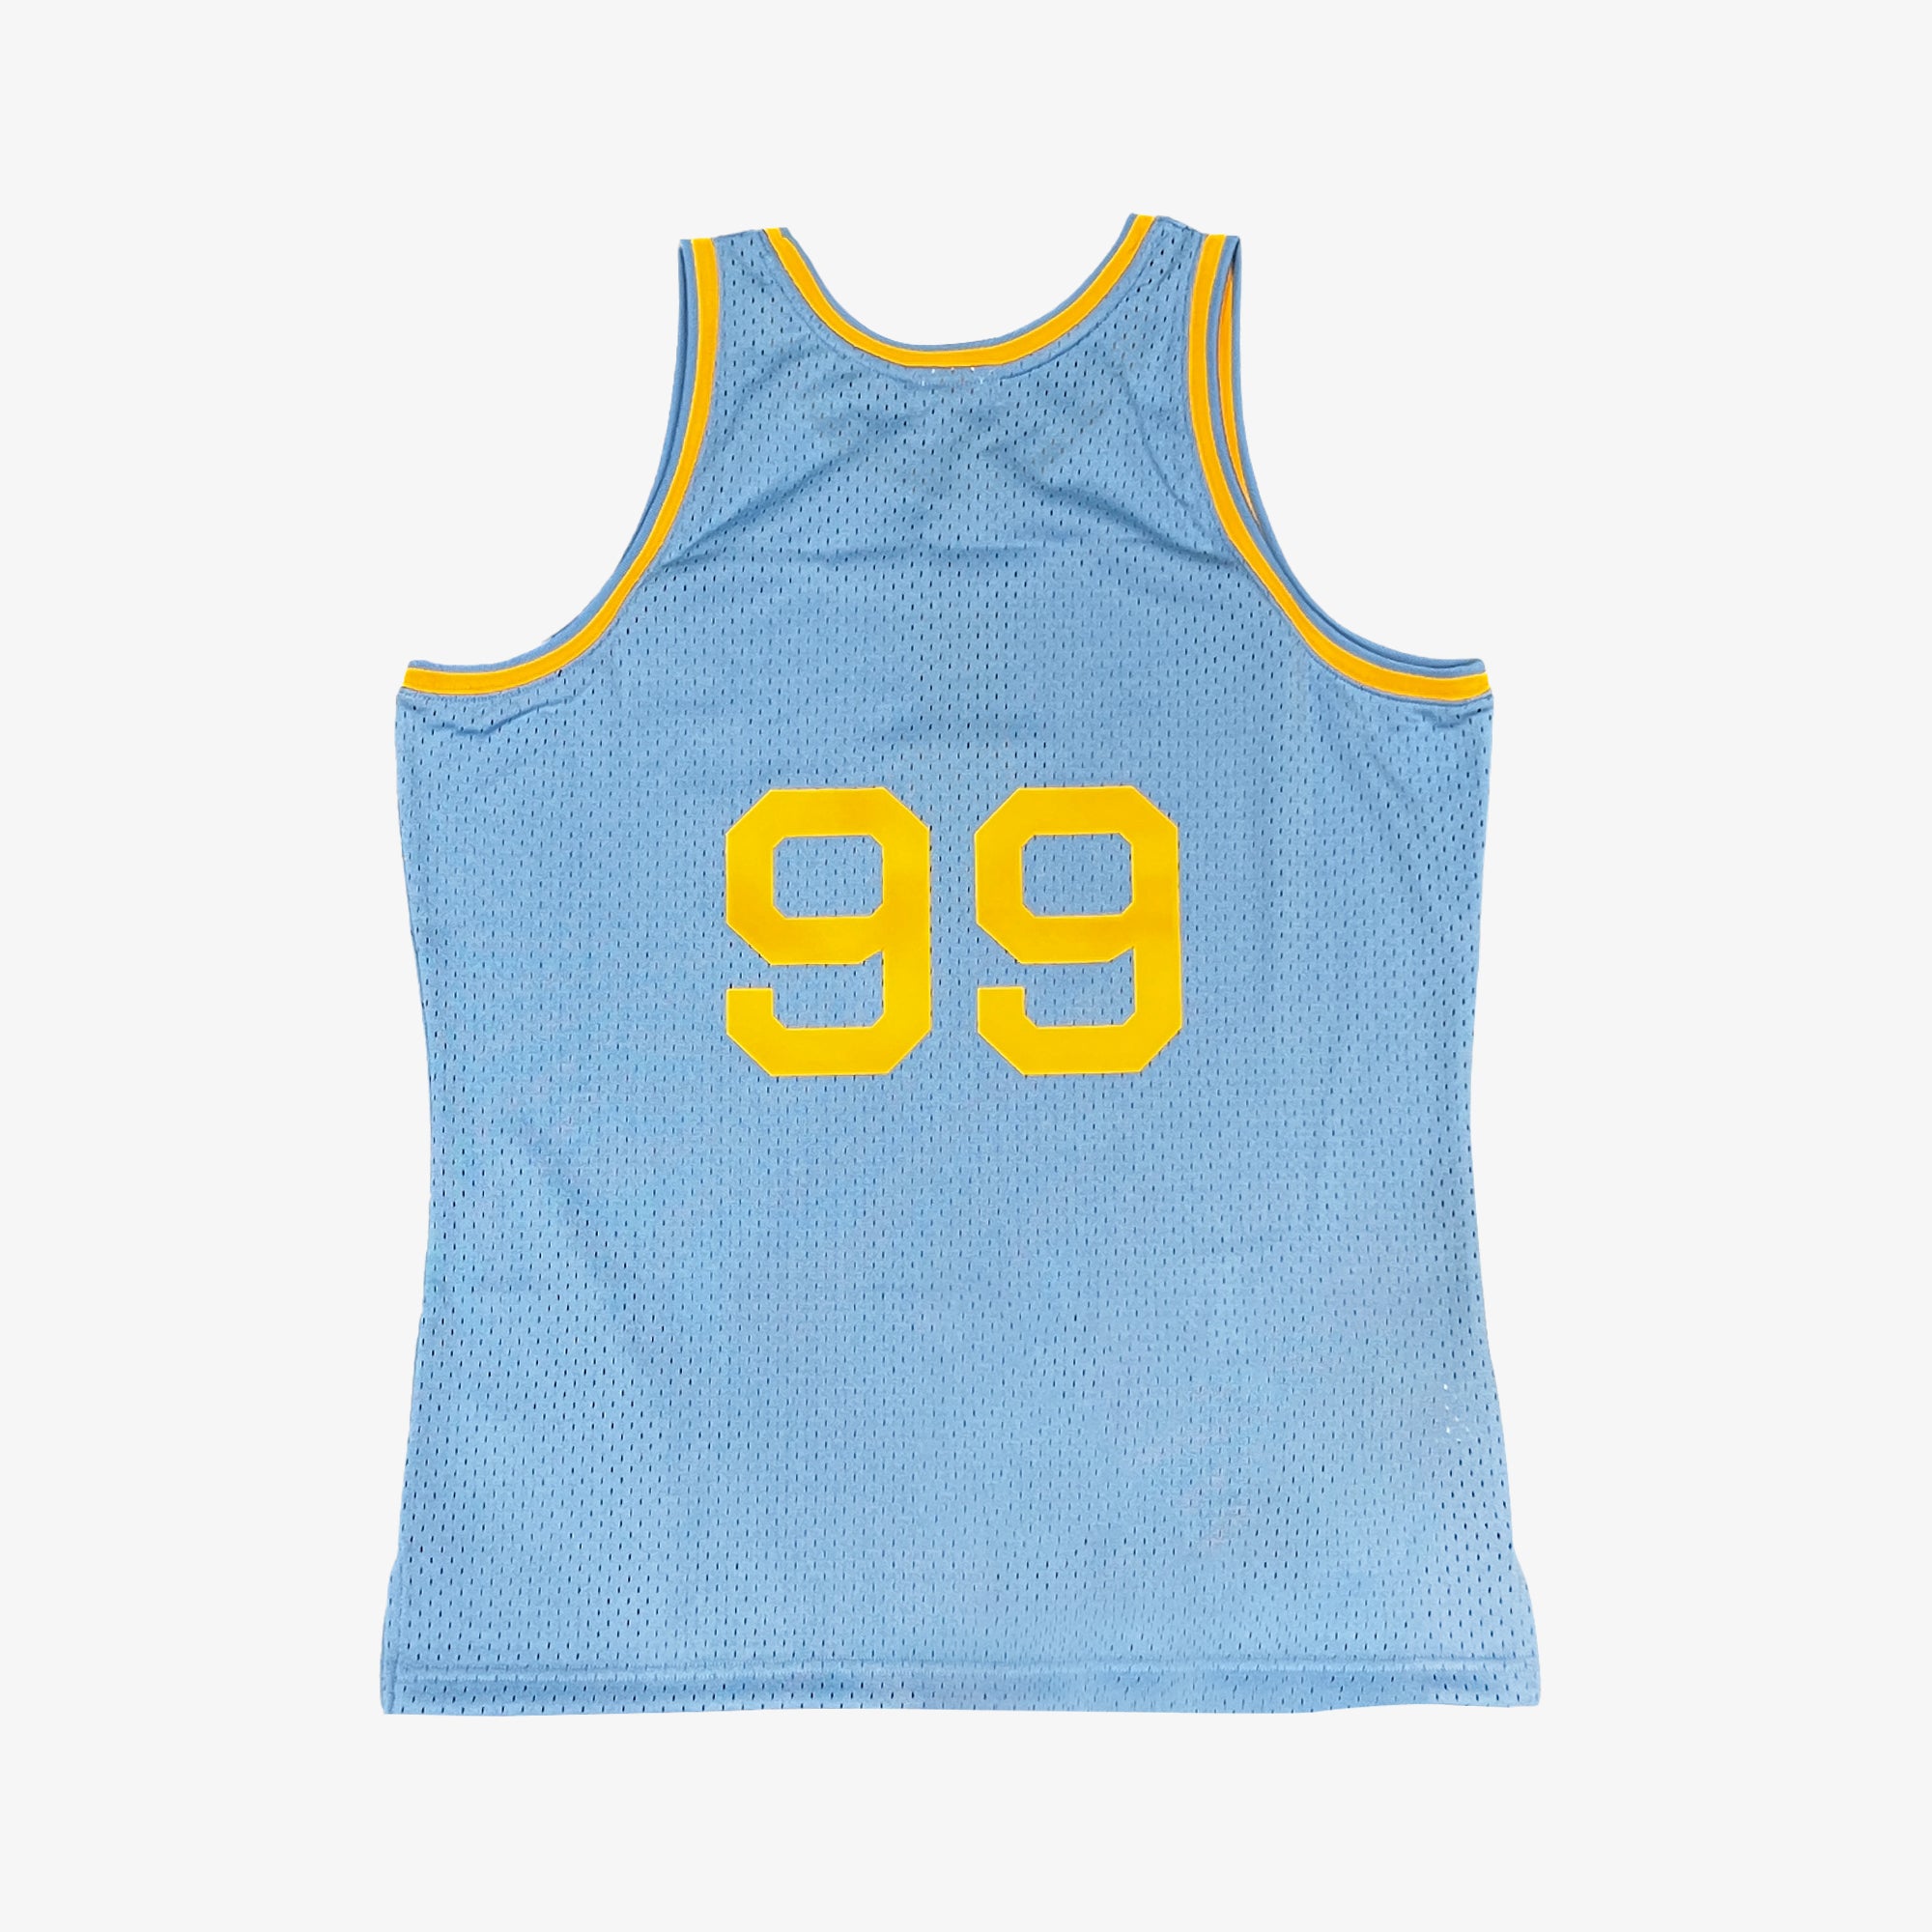 Petition · Retire George Mikan's Jersey ·